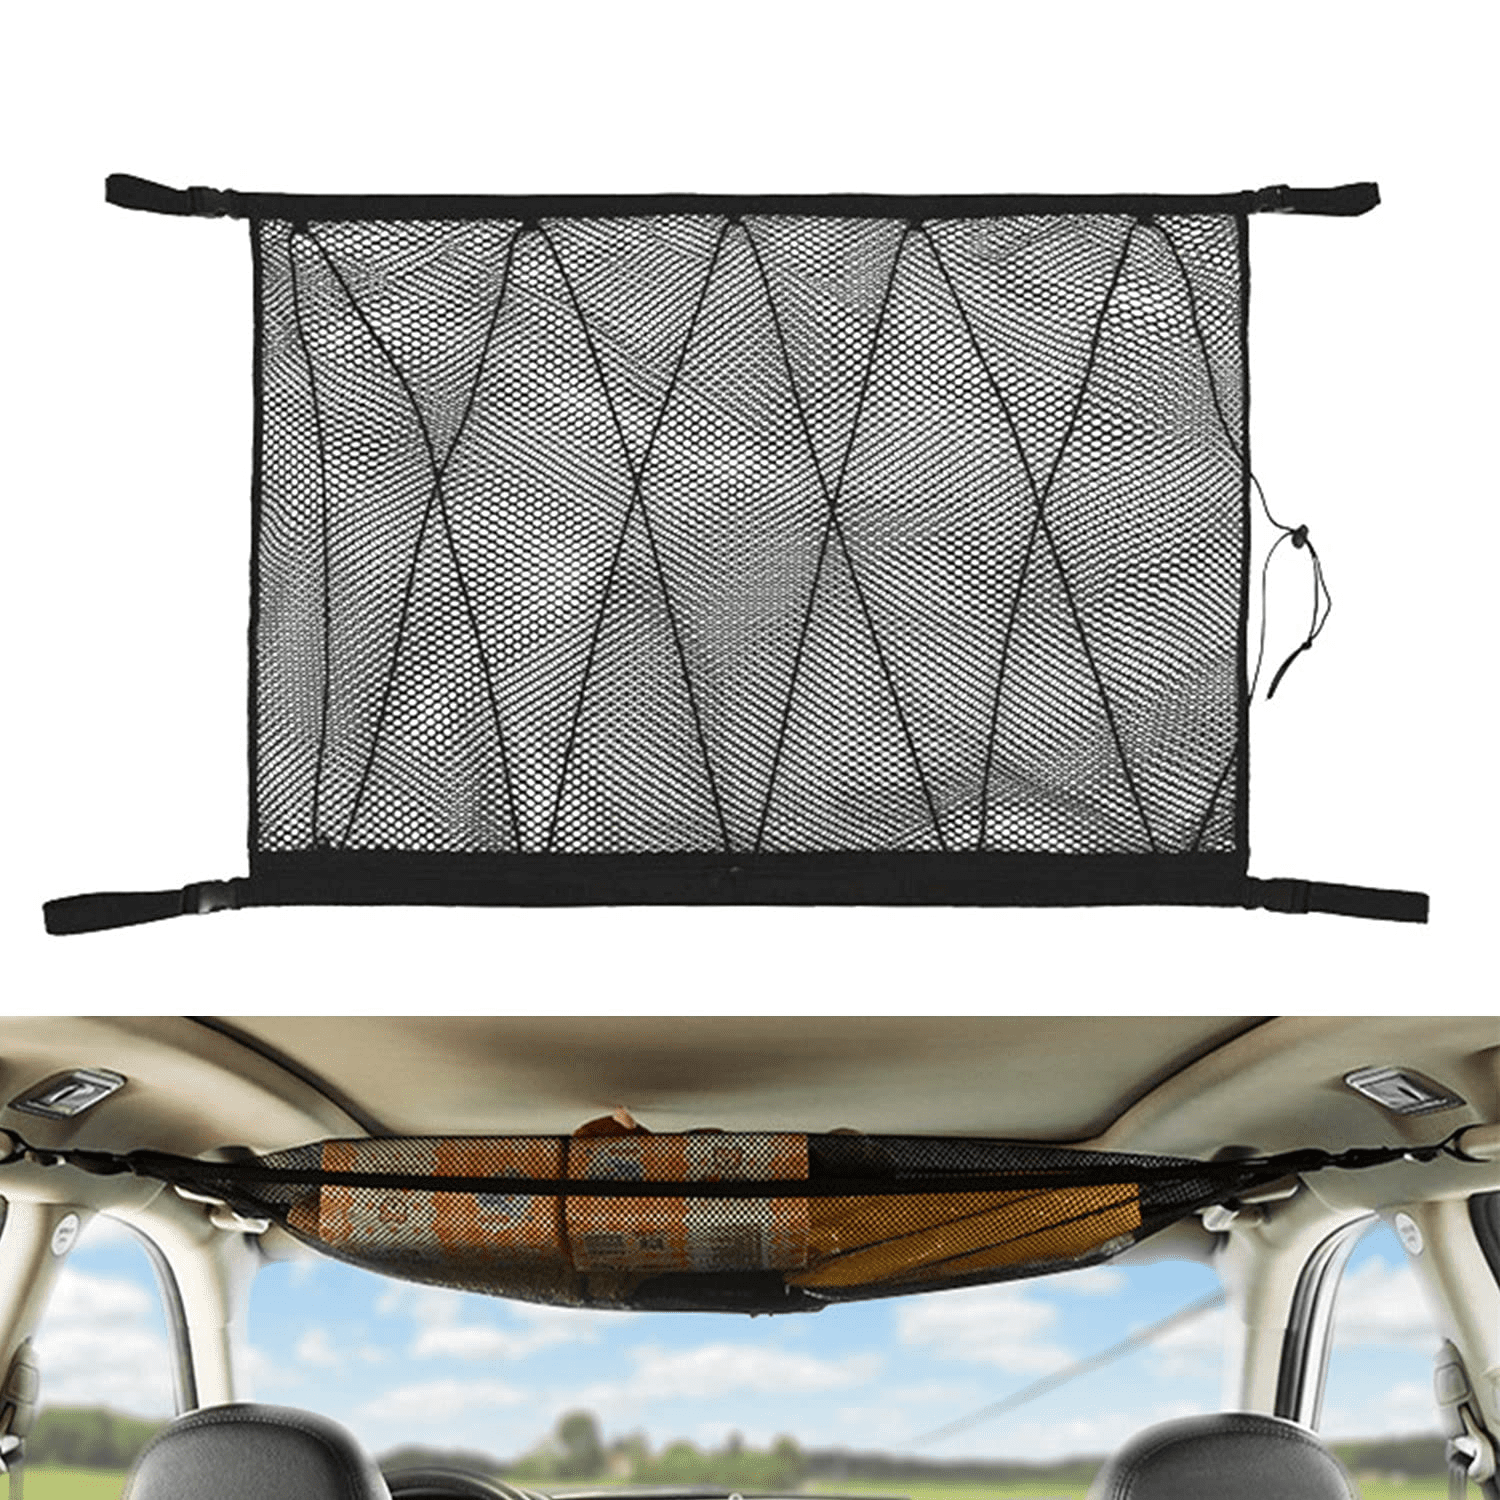 Tent ， Quilt, Childrens Toys, Towels and Sundries Car Ceiling Storage Net Pocket，Car Storage Bags for Long Trips,Adjustable Sundries Storage Pouch with Zipper Buckle，Storage Travel Supplies